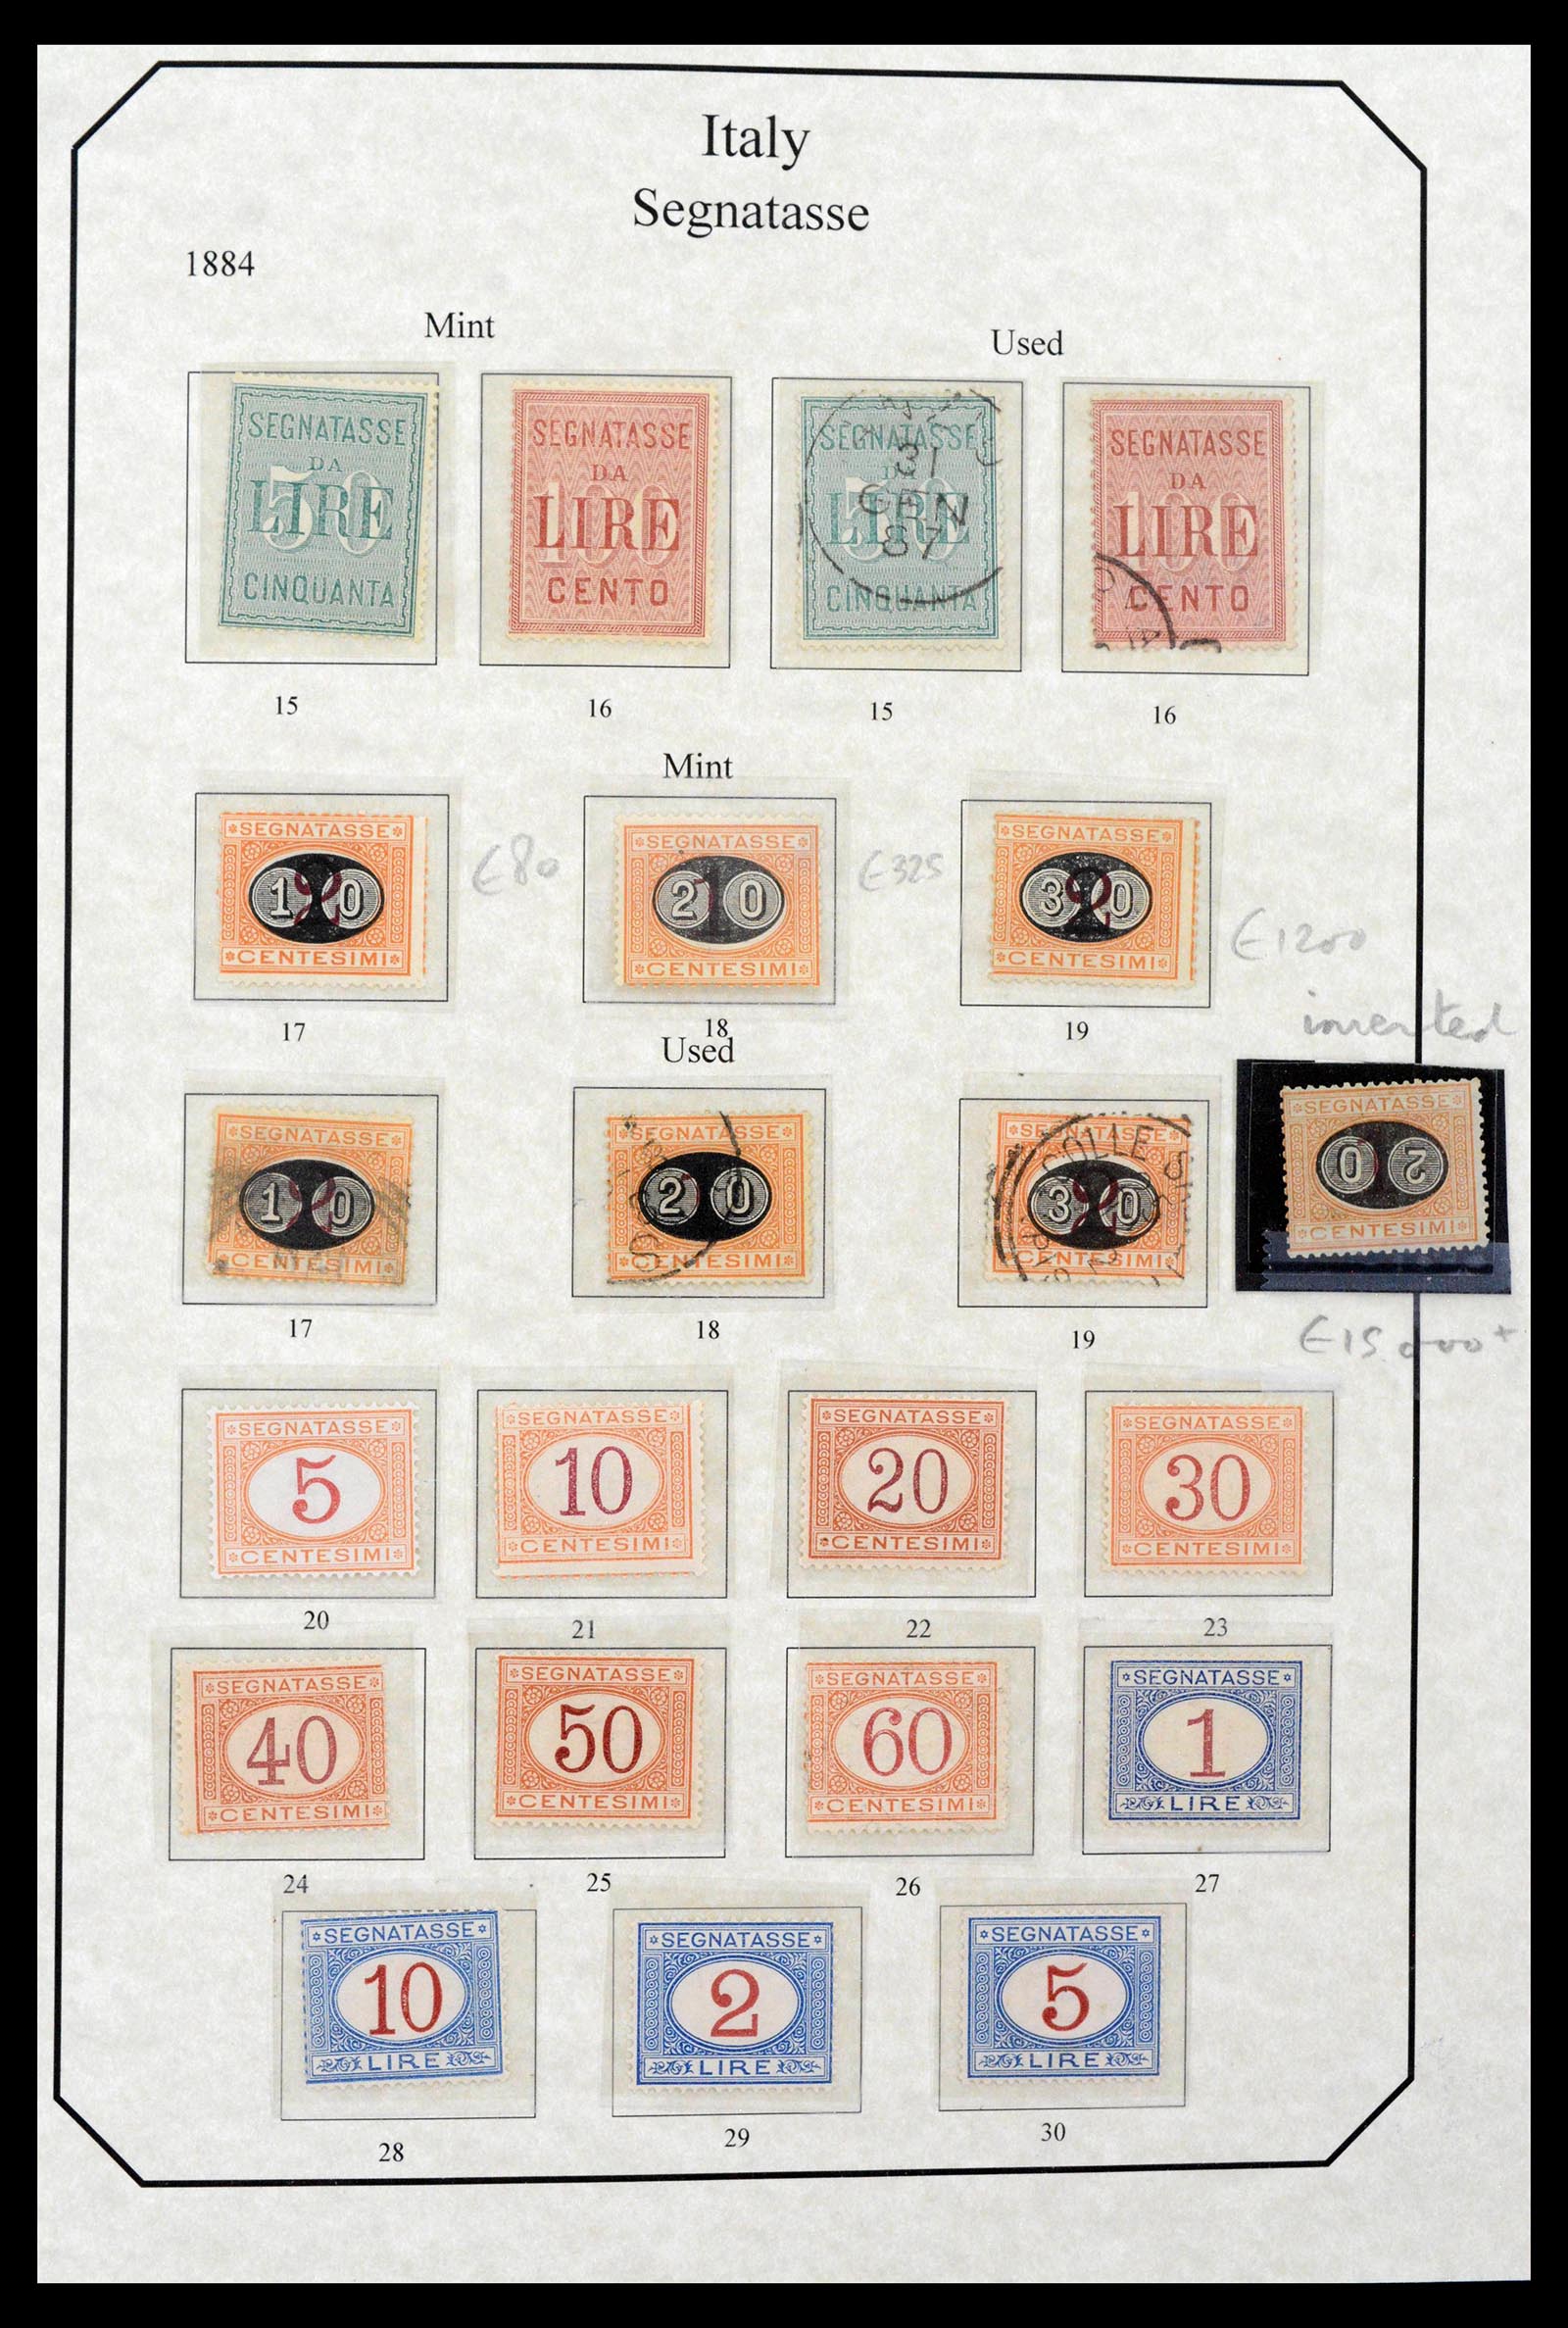 39022 0006 - Stamp collection 39022 Italy postage dues 1861-2000.